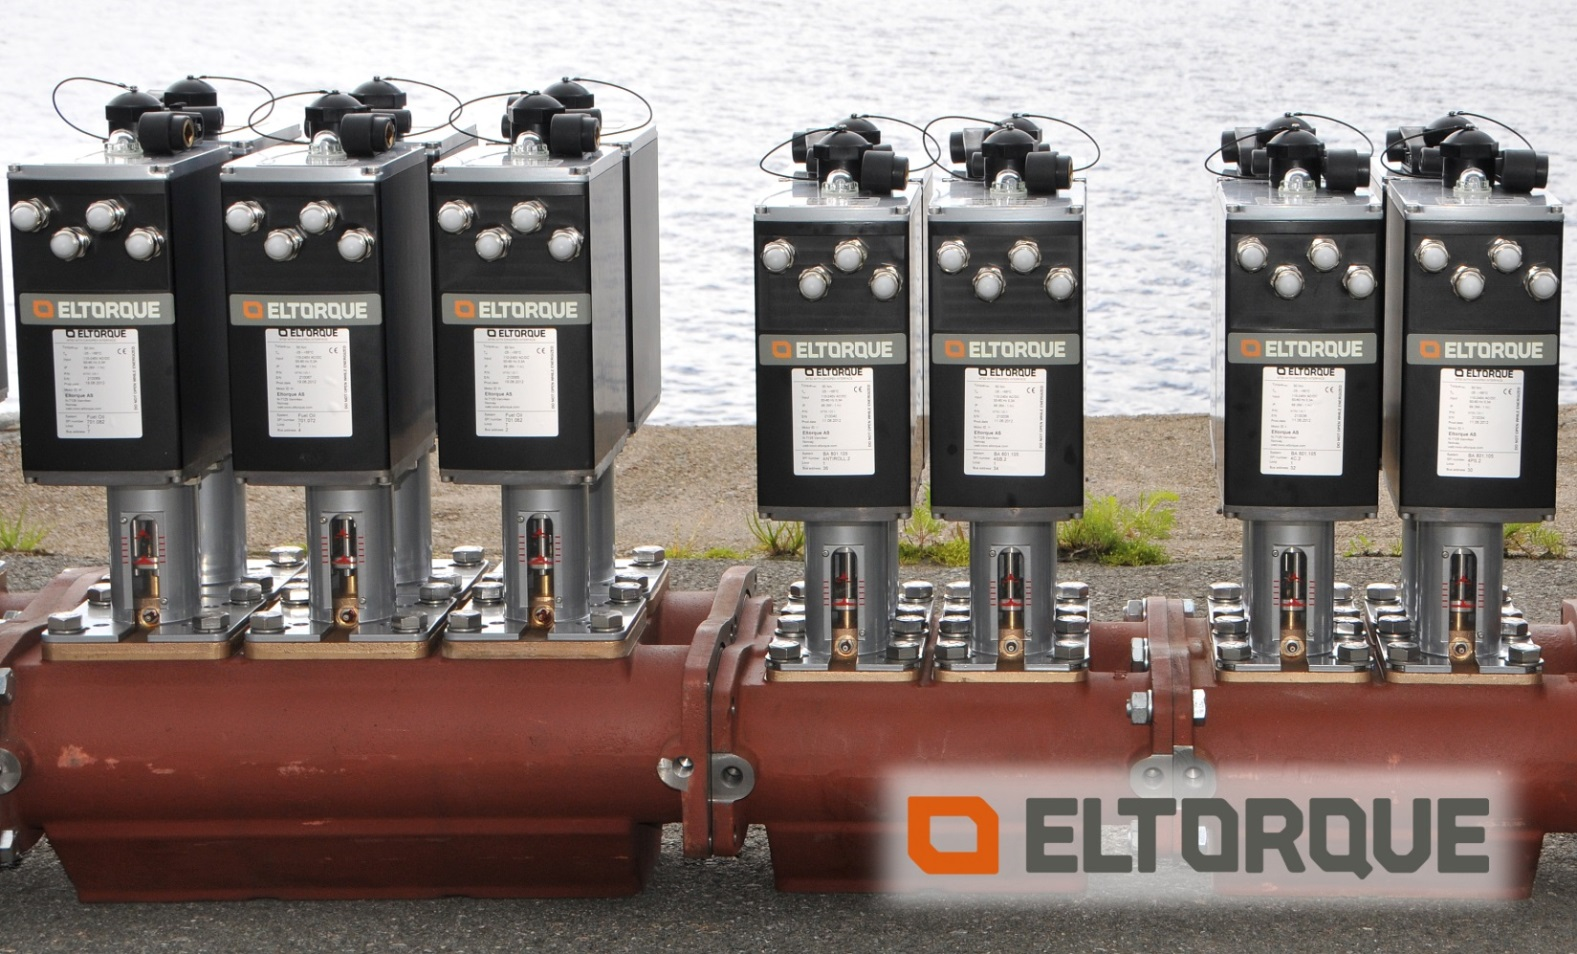 PTM Valve Manifolds with Eltorque Actuators Note manual emergency operation on top of actuators.